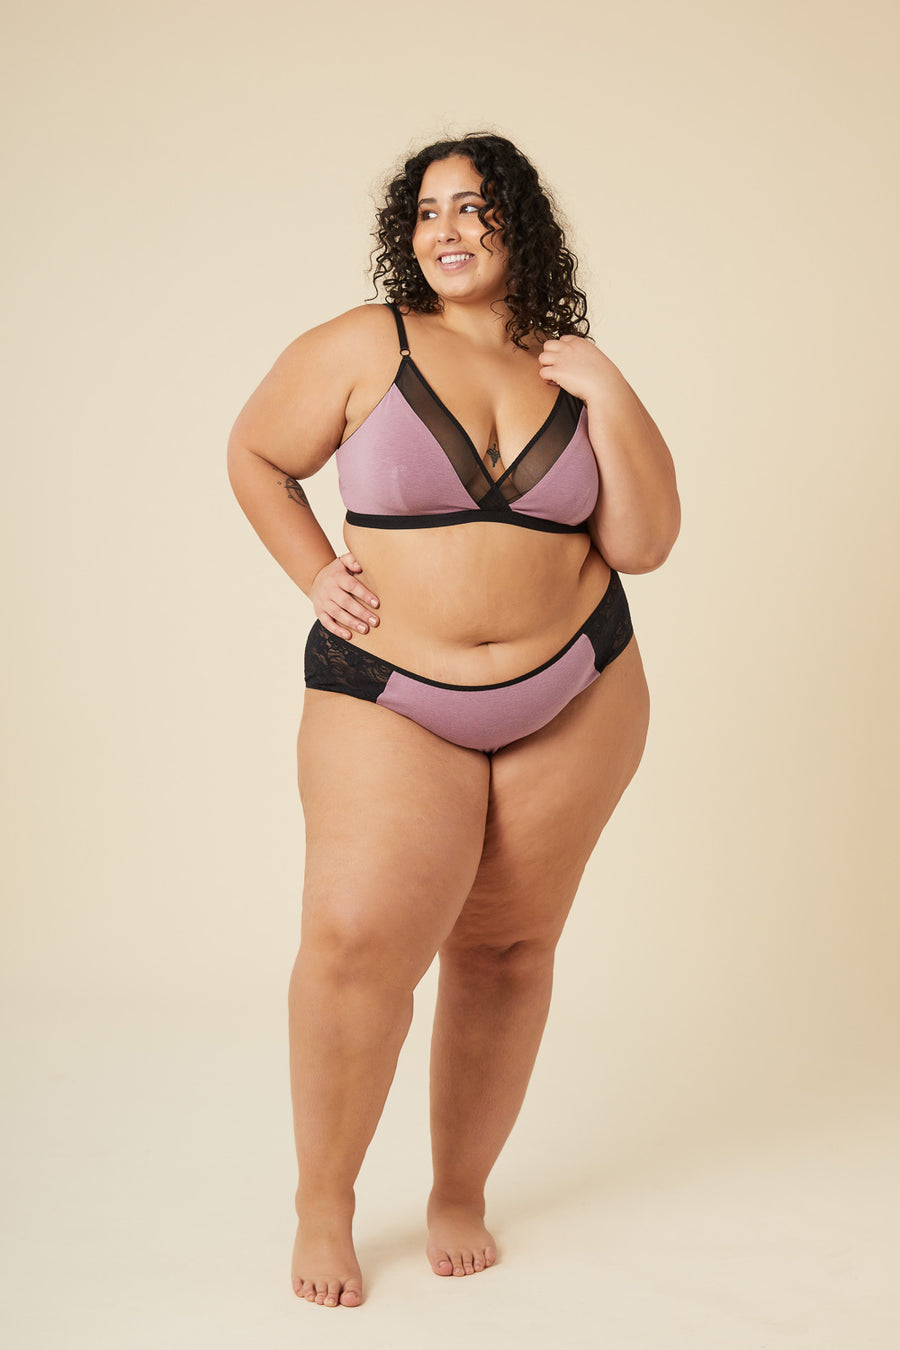 Forever 21 Plus Size Lingerie is a MUST HAVE - A Thick Girl's Closet